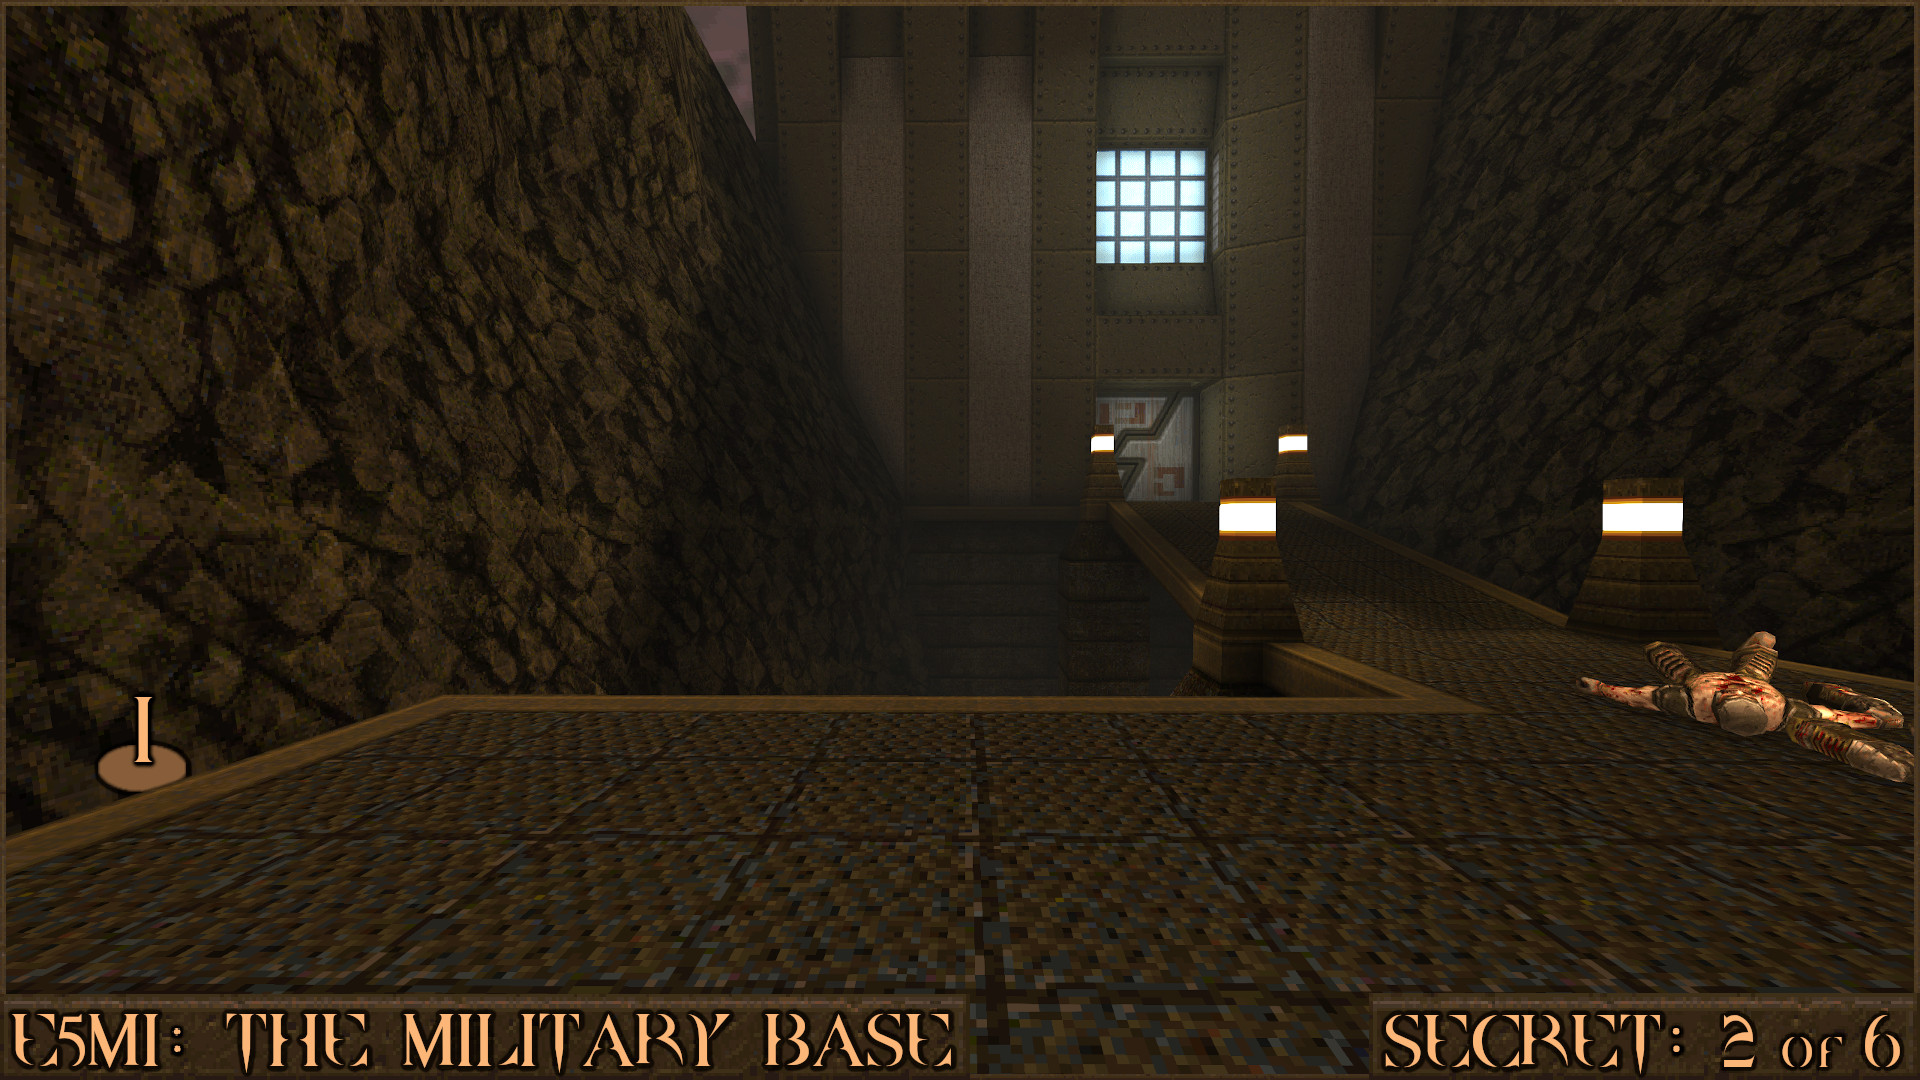 Quake Finding All Secrets in Quake Expansion pack: Dimension of the Past - E5M1: The Military Base - 442E0D7